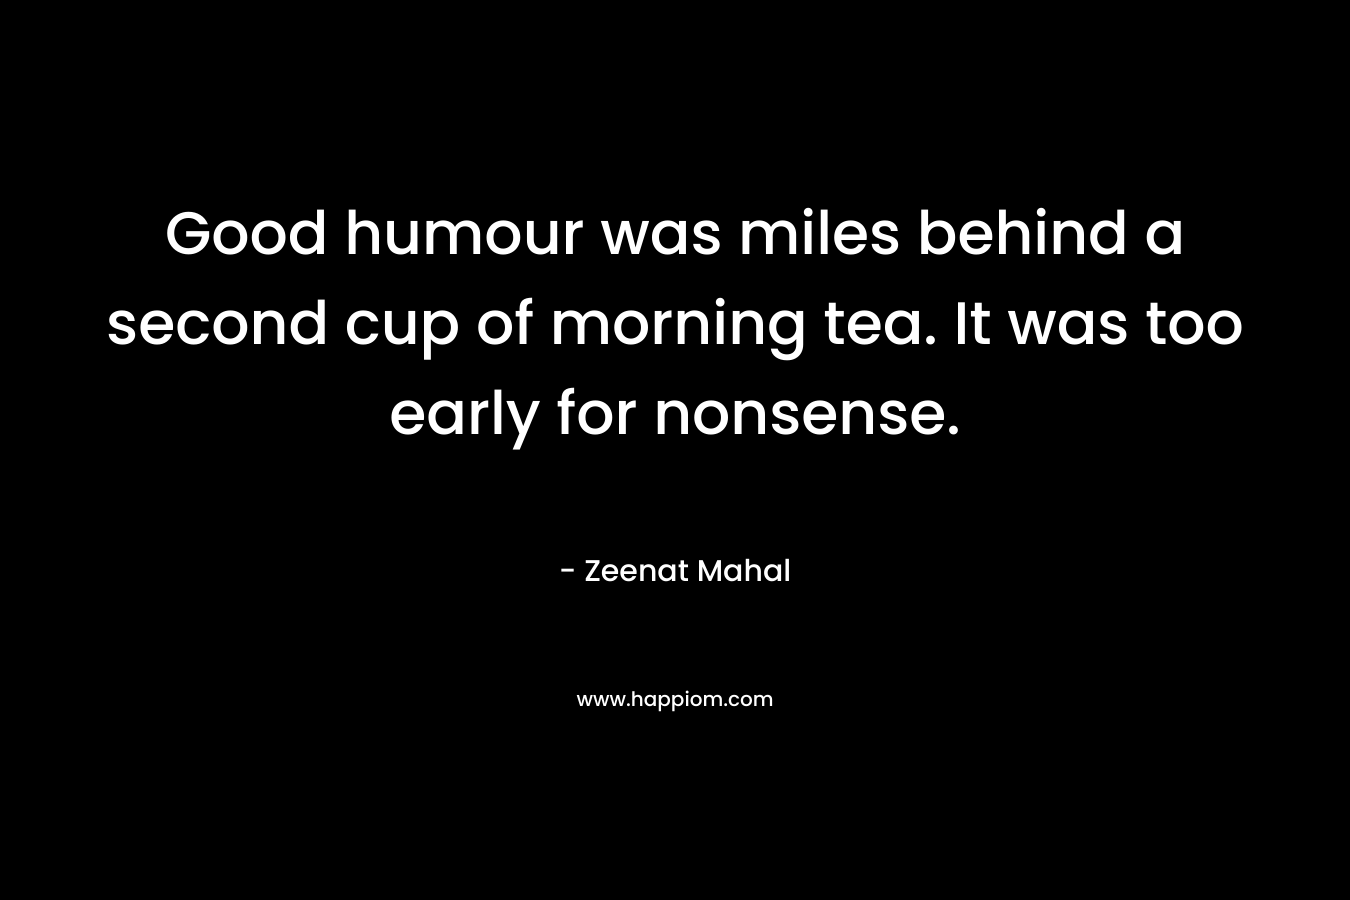 Good humour was miles behind a second cup of morning tea. It was too early for nonsense. – Zeenat Mahal